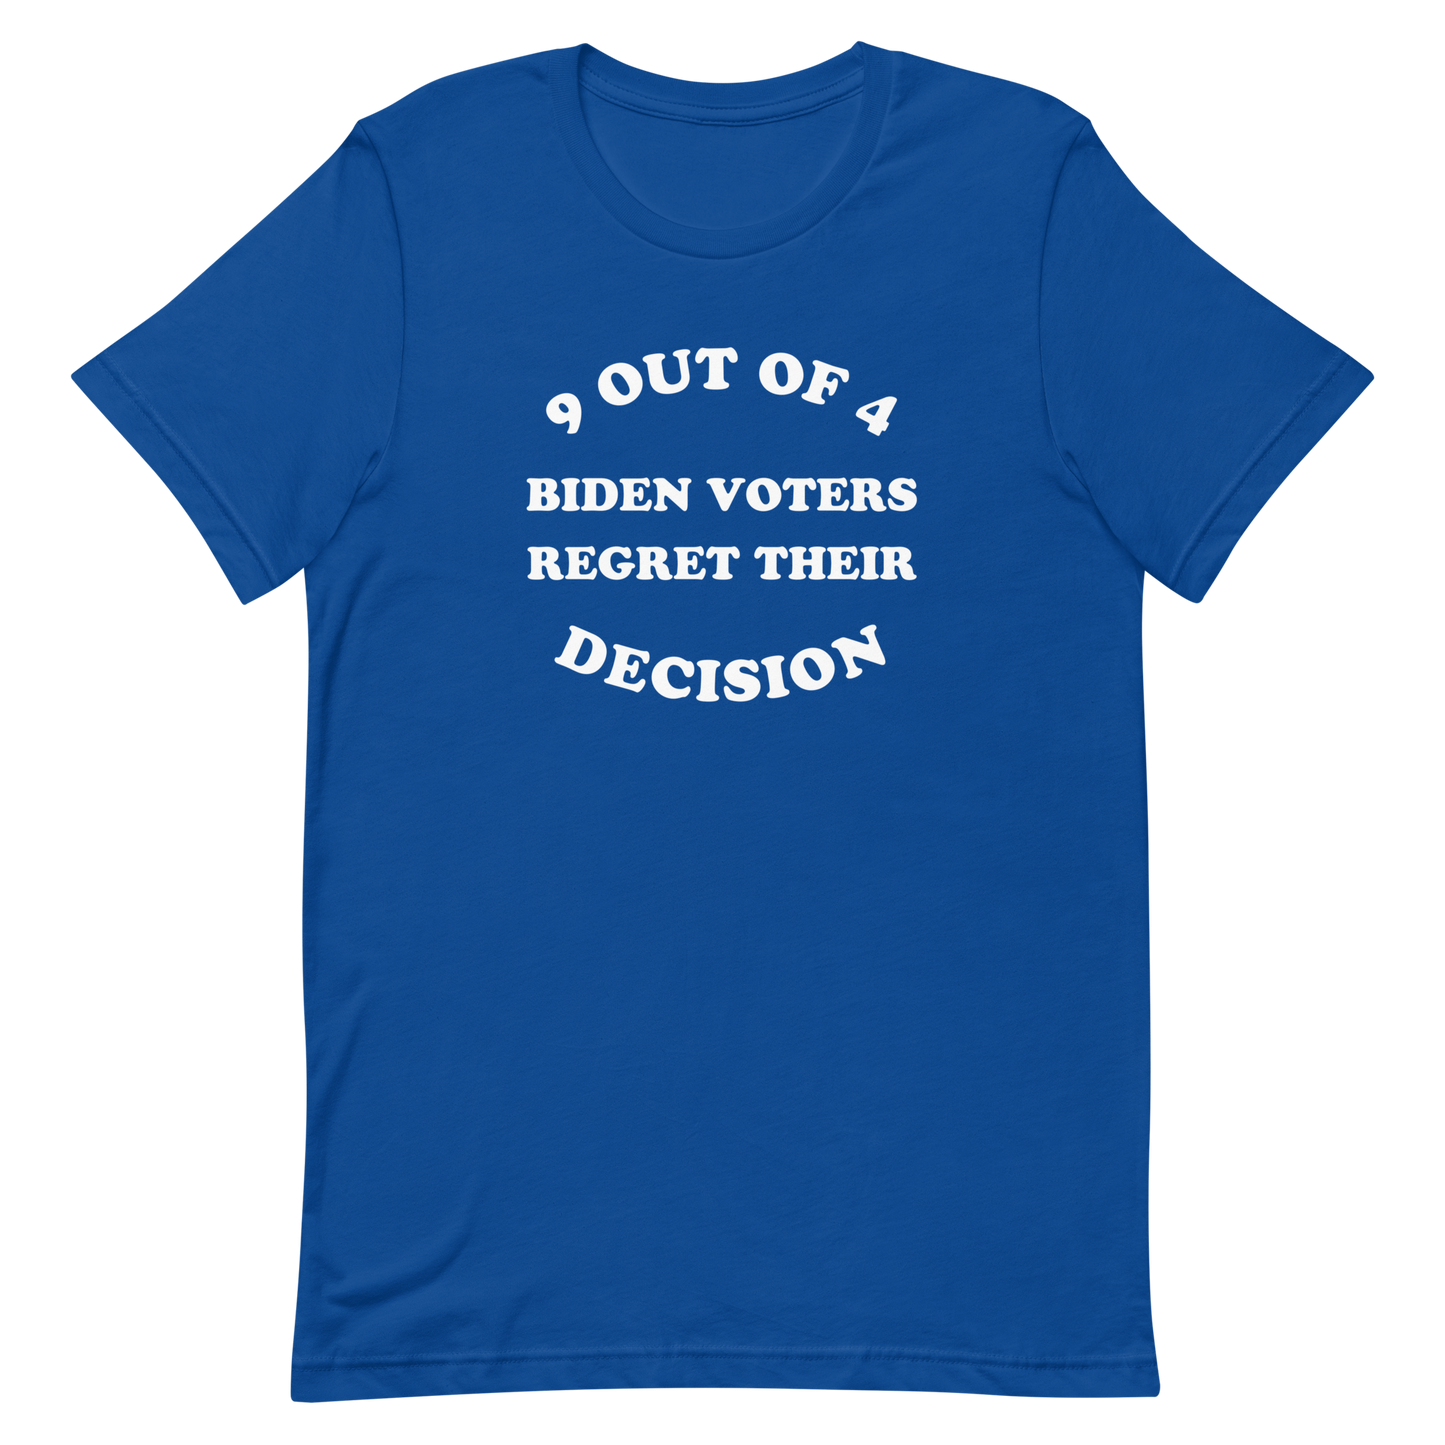 9 Out Of 4 Biden Voters T-shirt